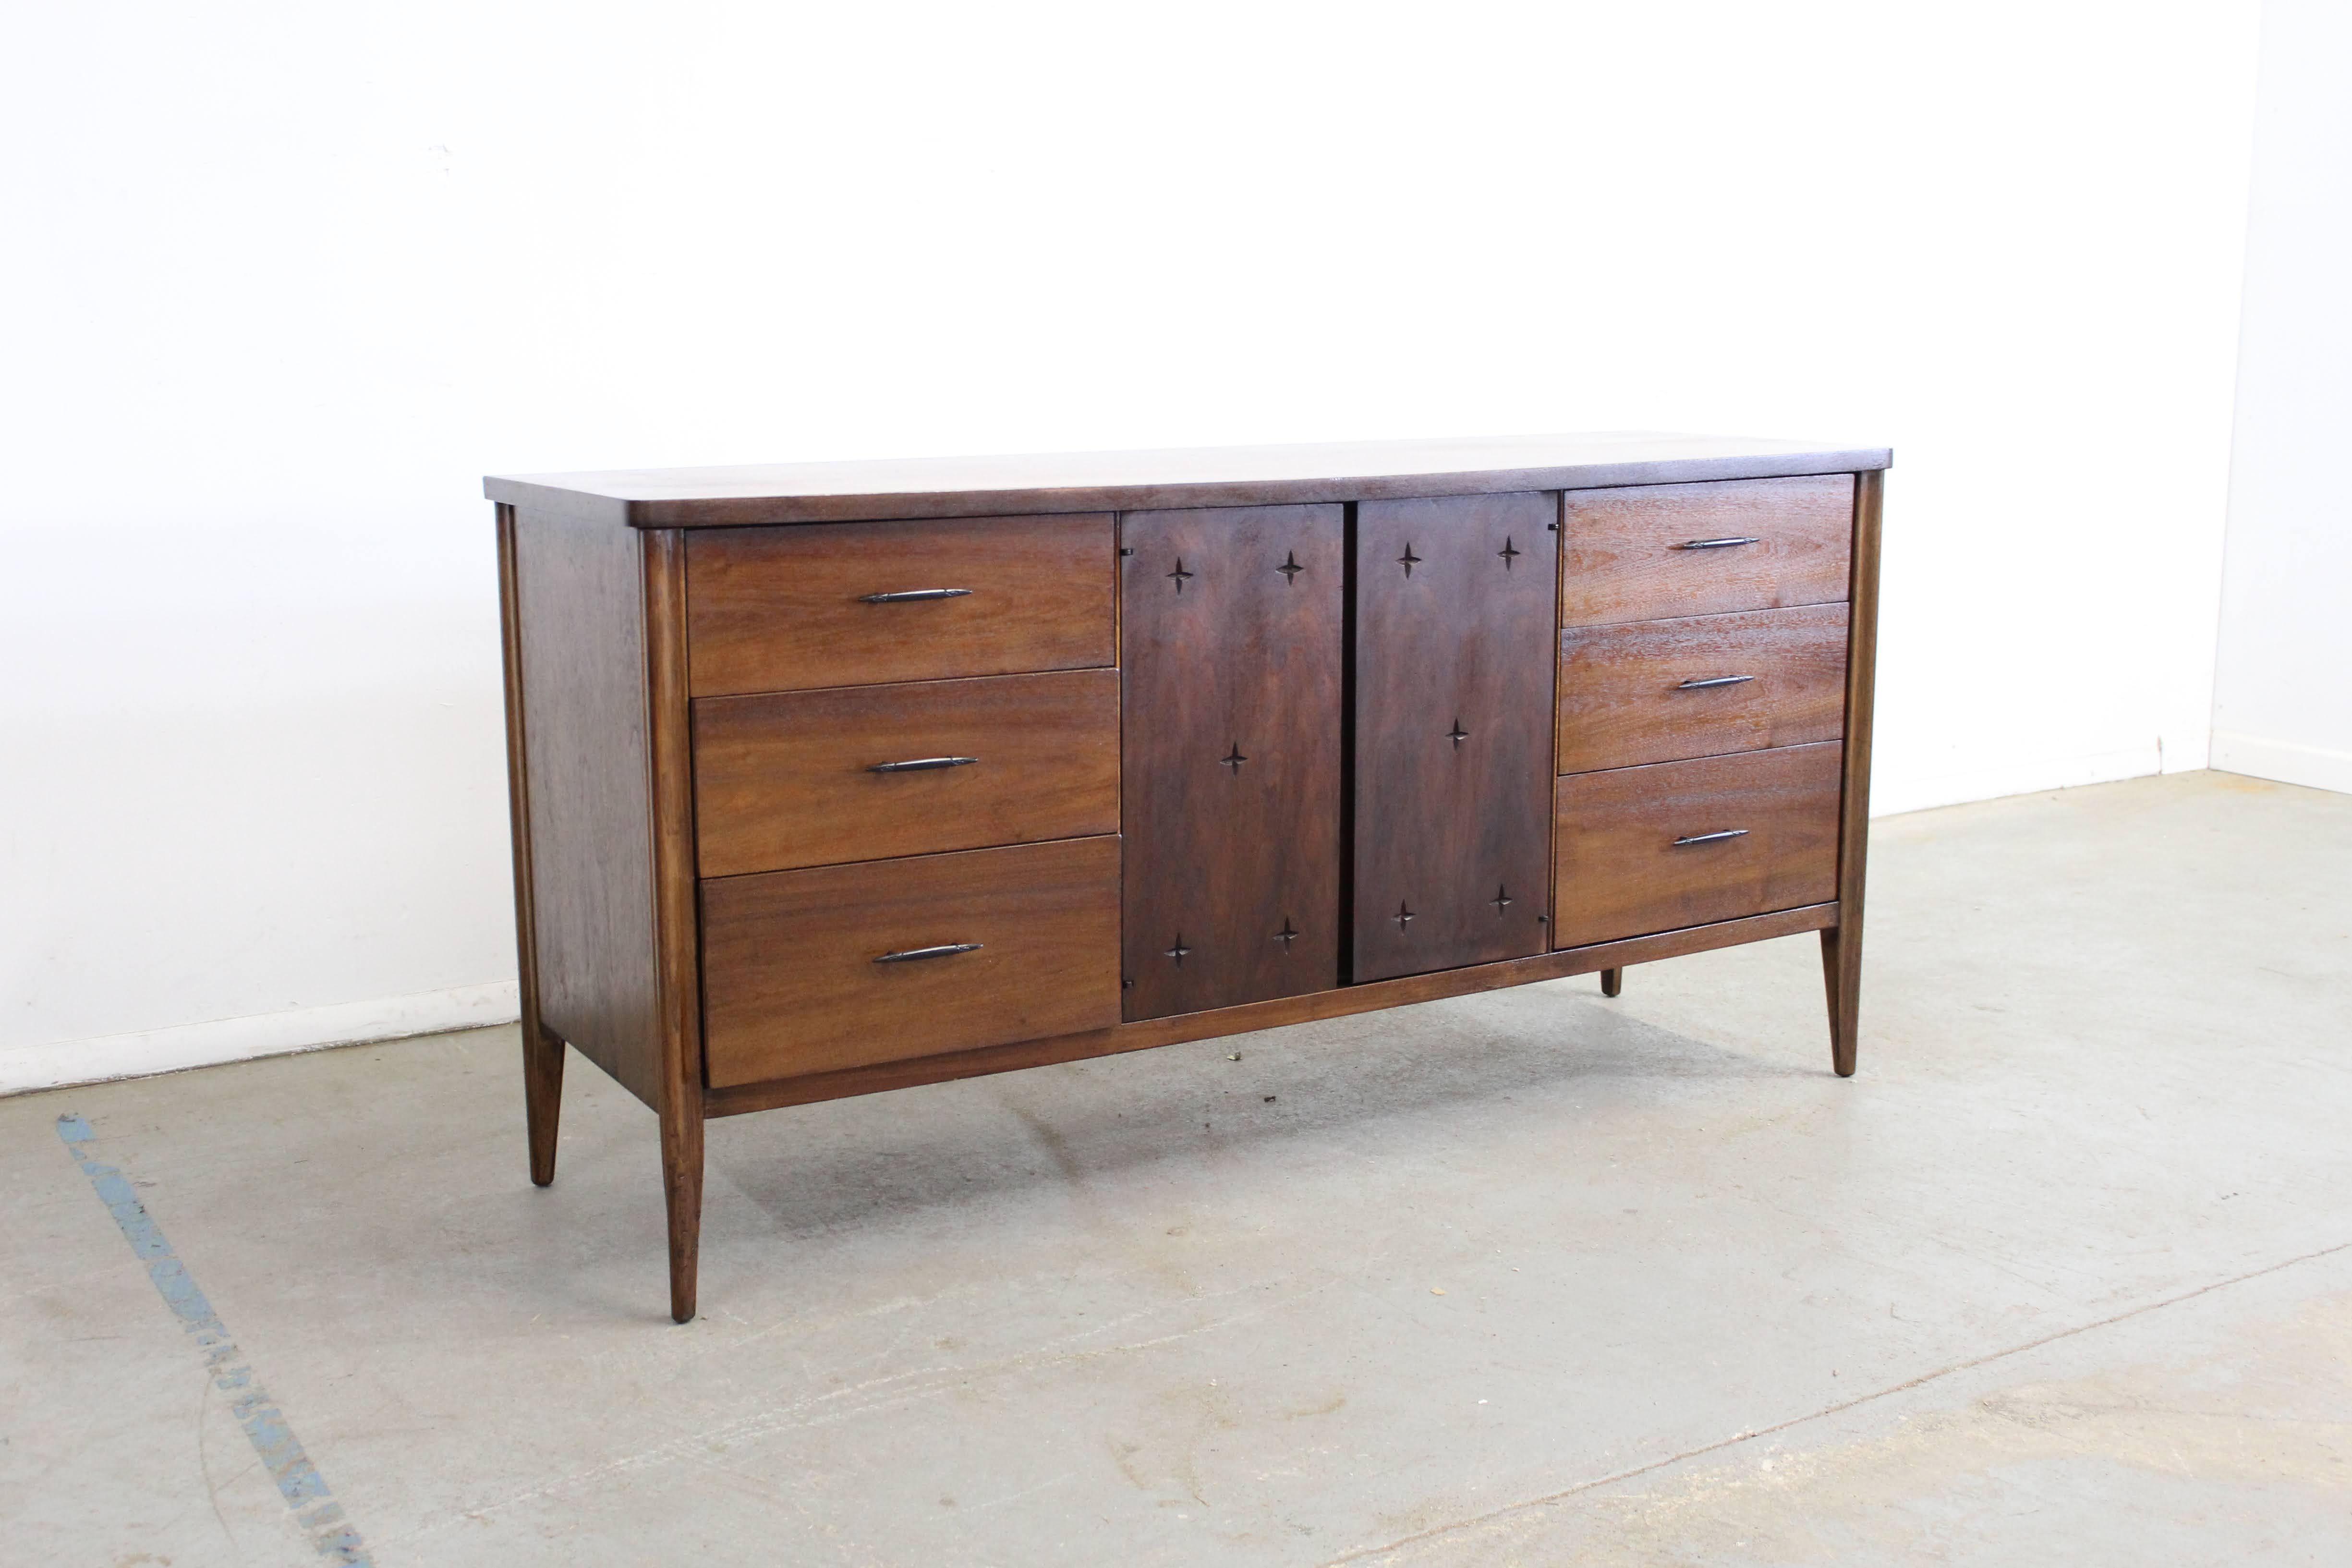 Offered is a walnut credenza. Features 6 drawers with 2 cabinets that reveal 3 more drawers.It is in good condition, showing some age wear, (surface scratches/chips, watermark on top, vintage wear-- see pictures) but nothing overly bothersome